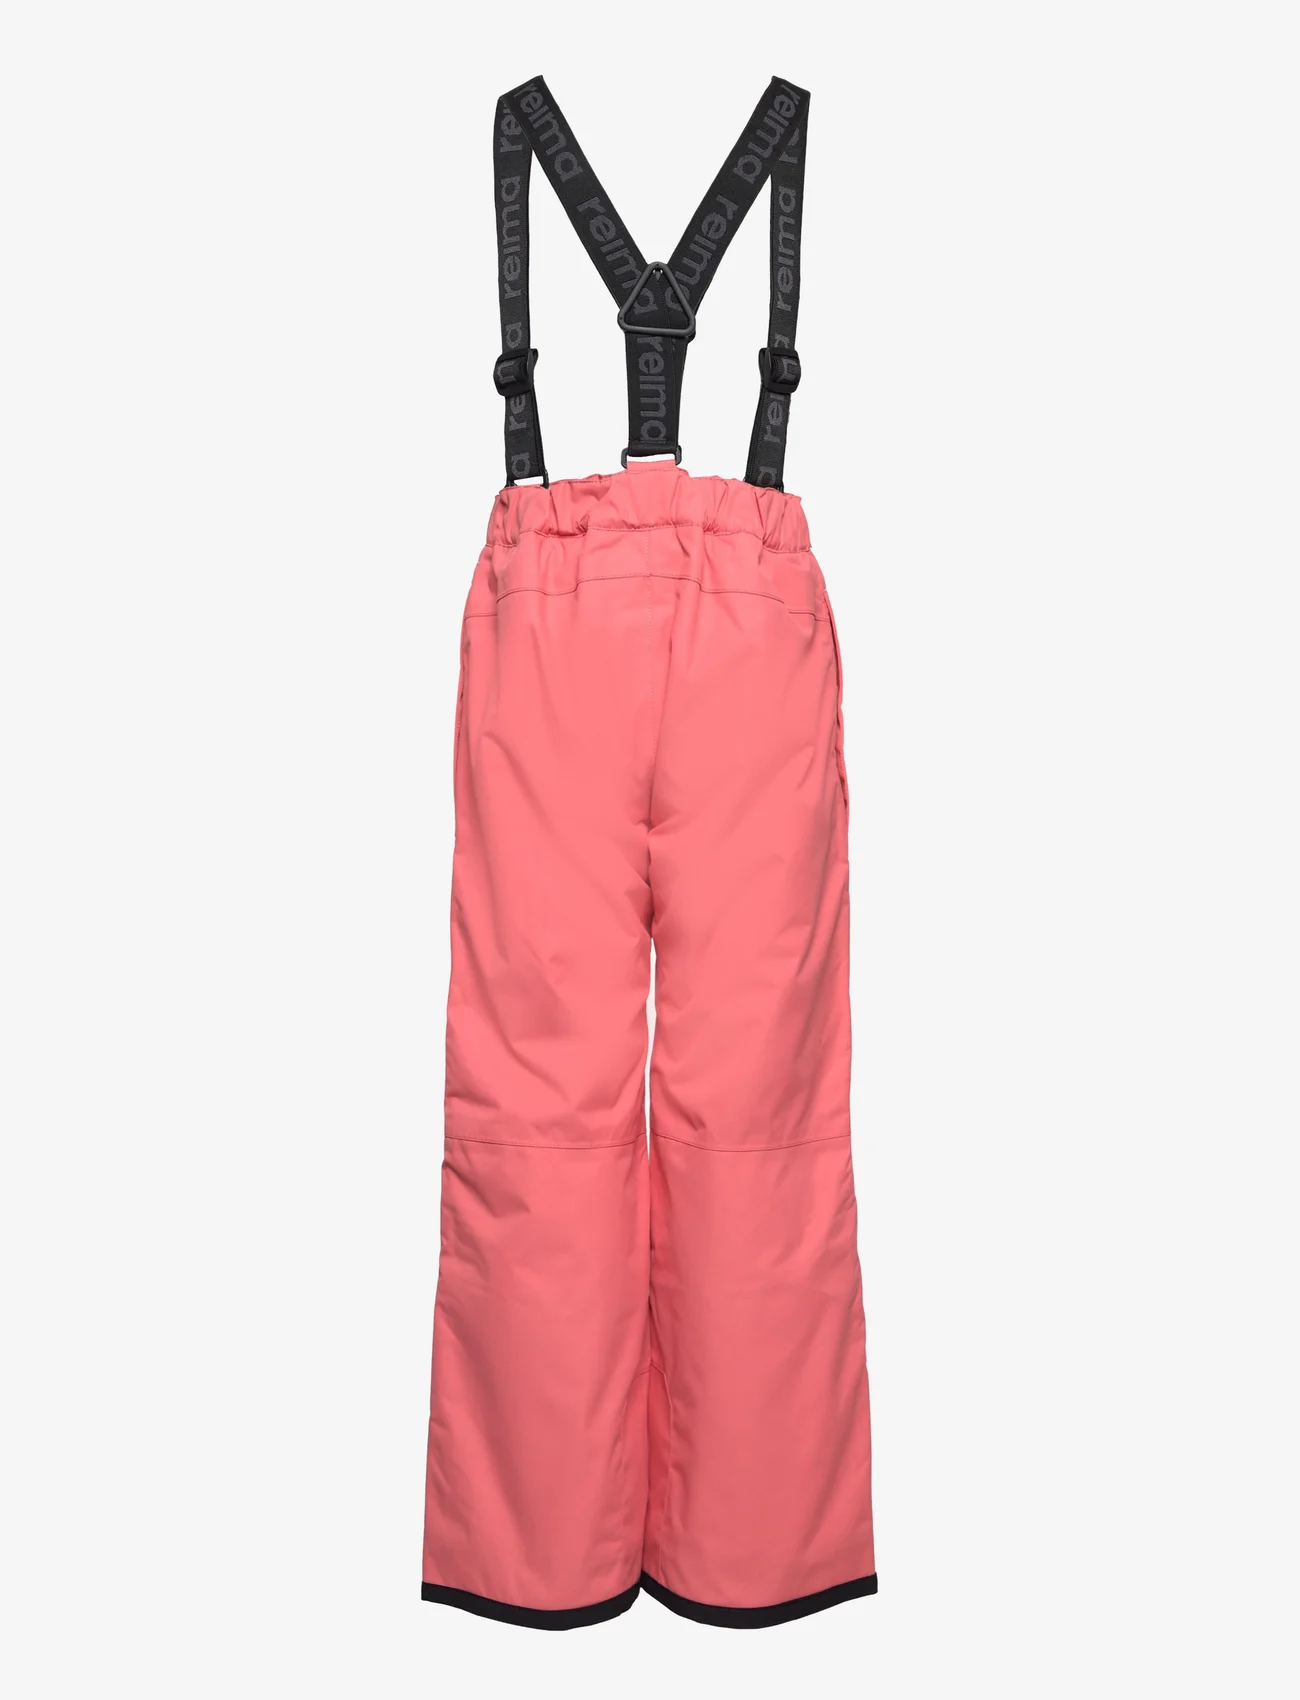 Reima - Kids' winter trousers Proxima - underdele - pink coral - 1